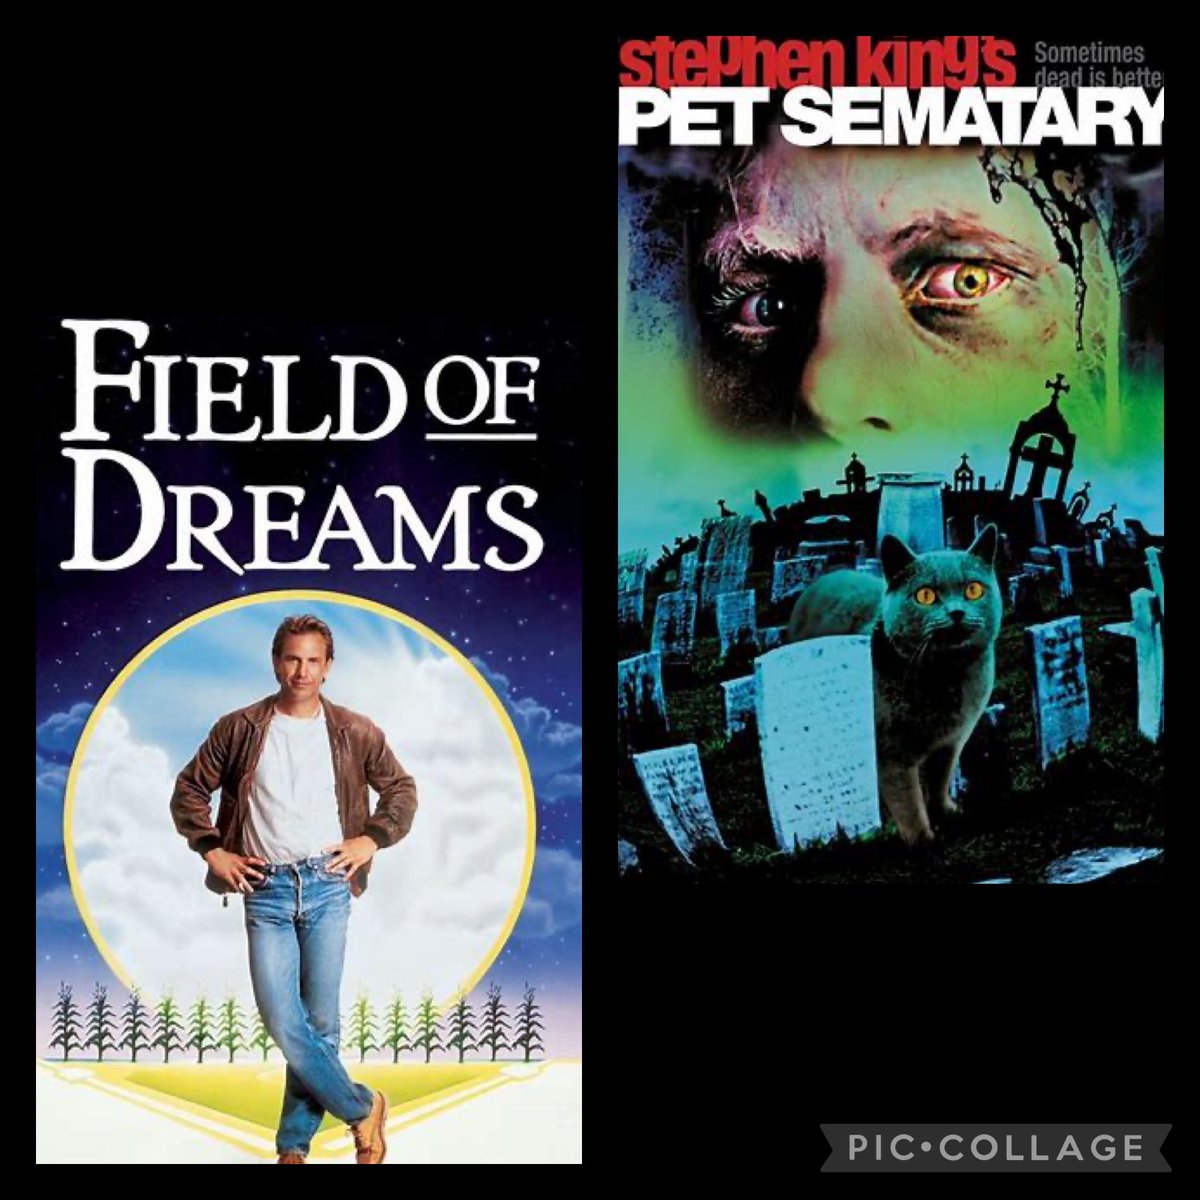 Field of Dreams and Pet Semetary were released on this day in 1989

#FieldofDreams #PetSemetary #80smovies #1980s